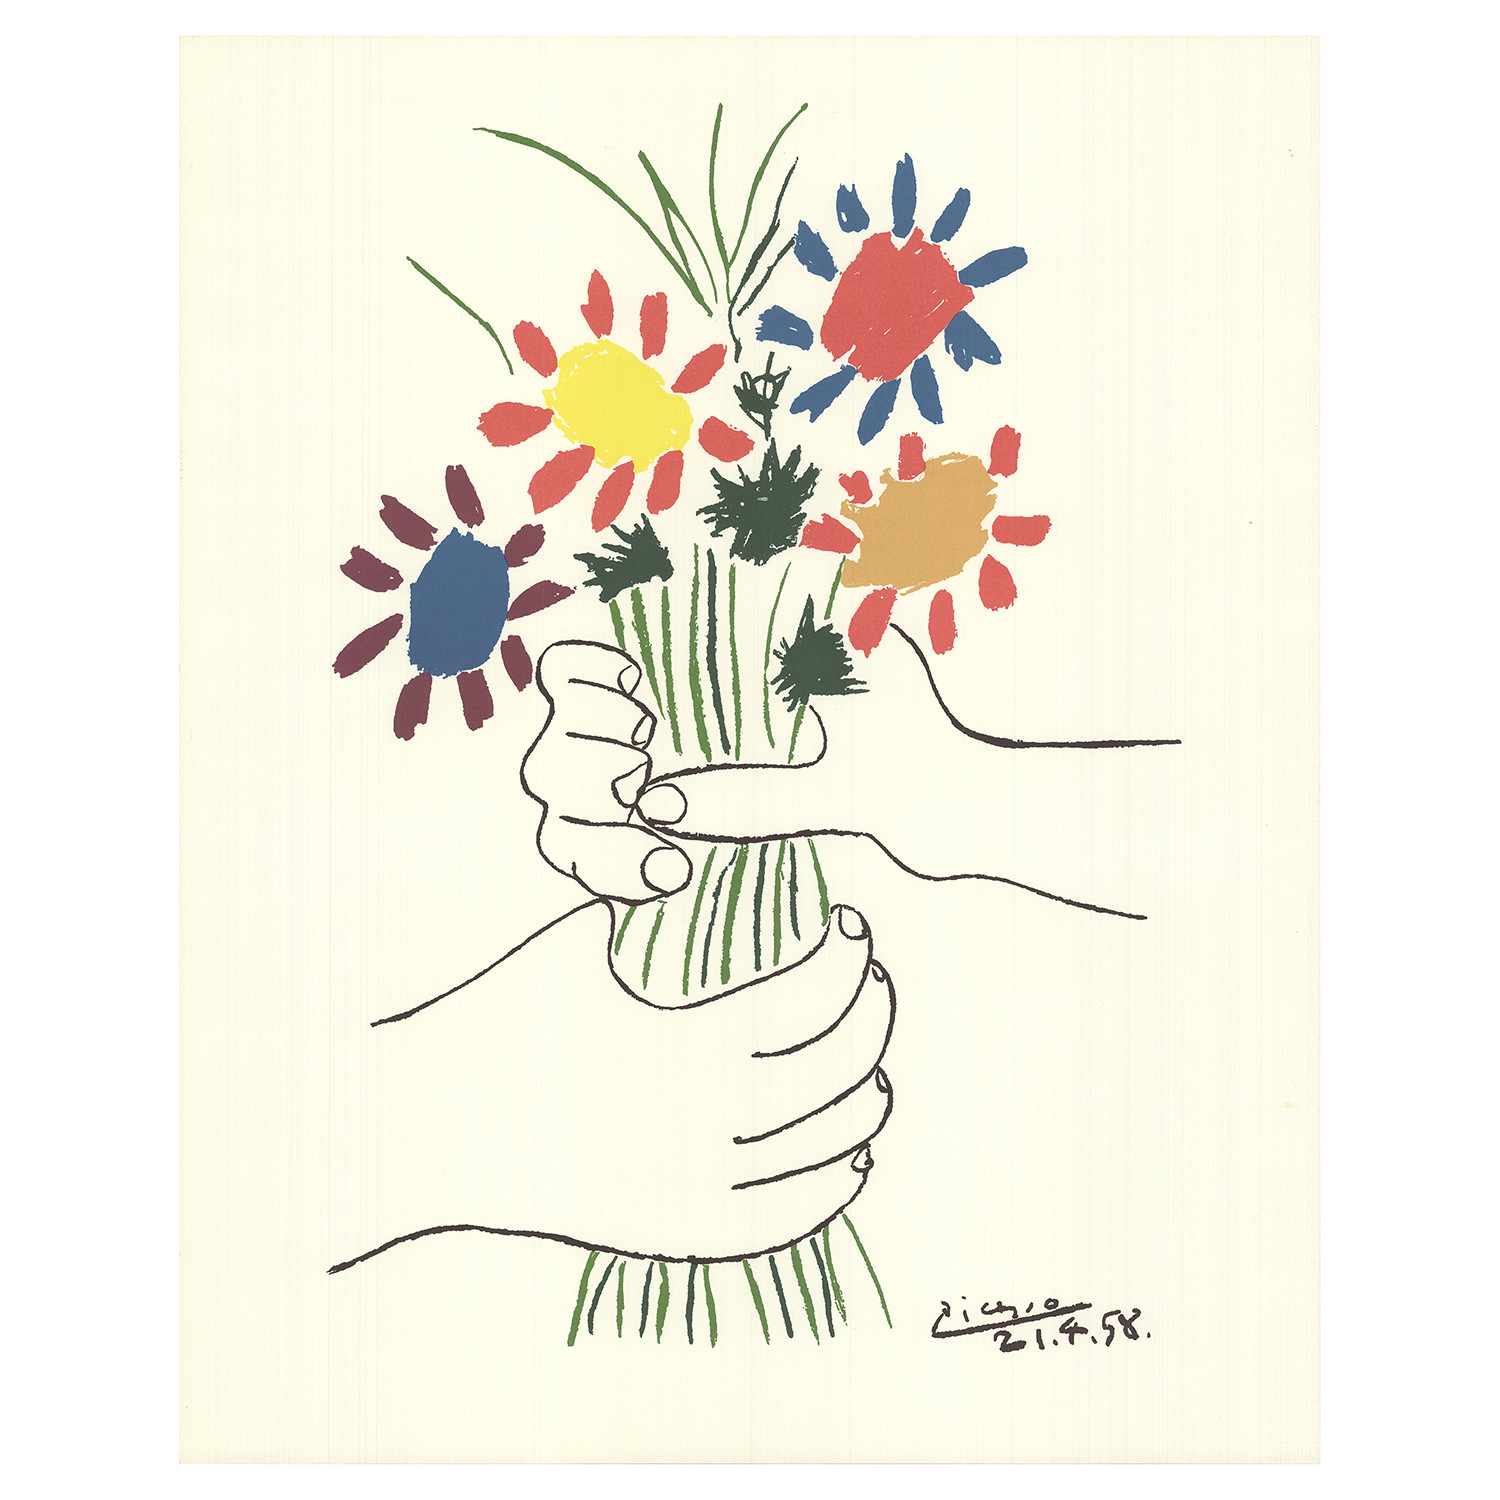 pablo-picasso-bouquet-of-peace-large-1969-lithograph-the